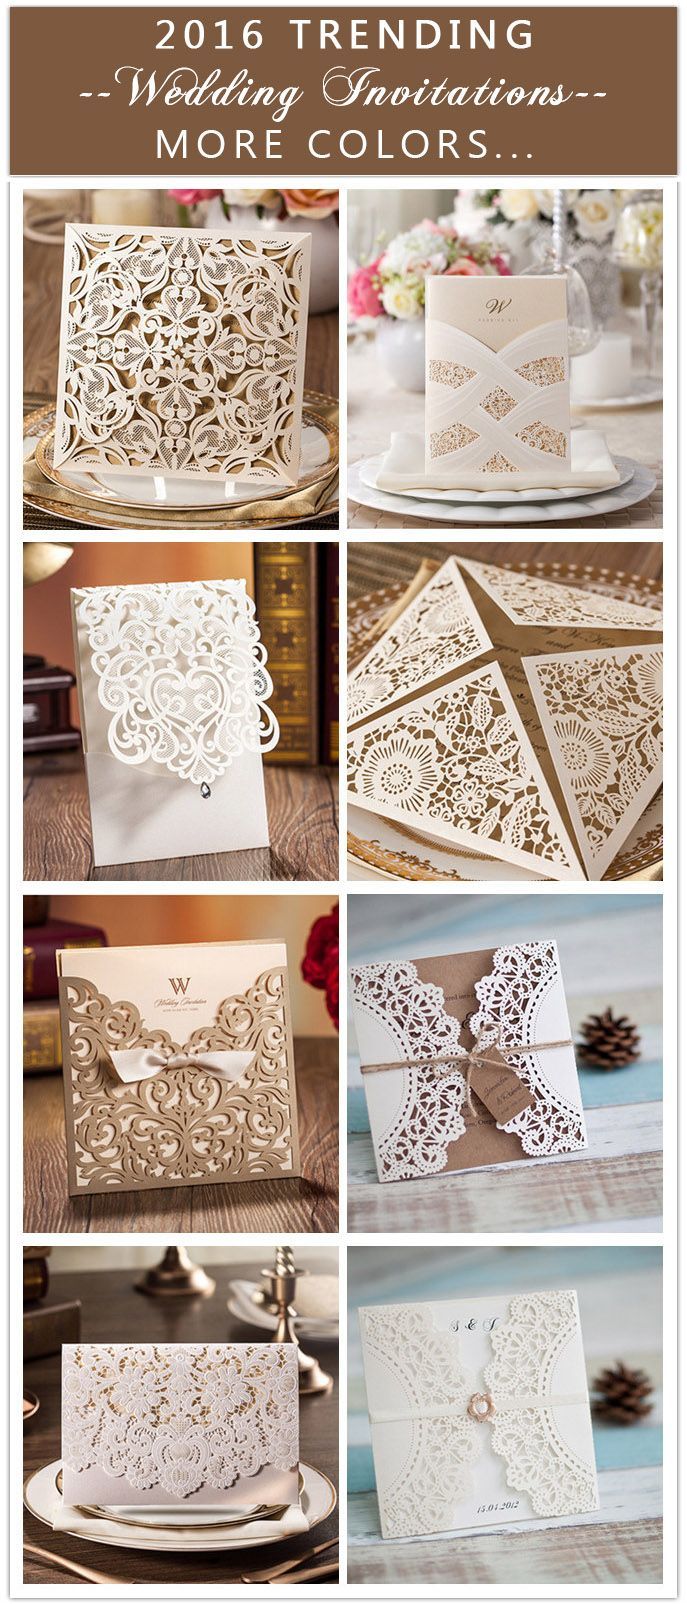 2016 trending laser cut wedding invitations with more colors like navy blue, blush, black… USE COUPON CODE “PRO” TO GET 15% OFF